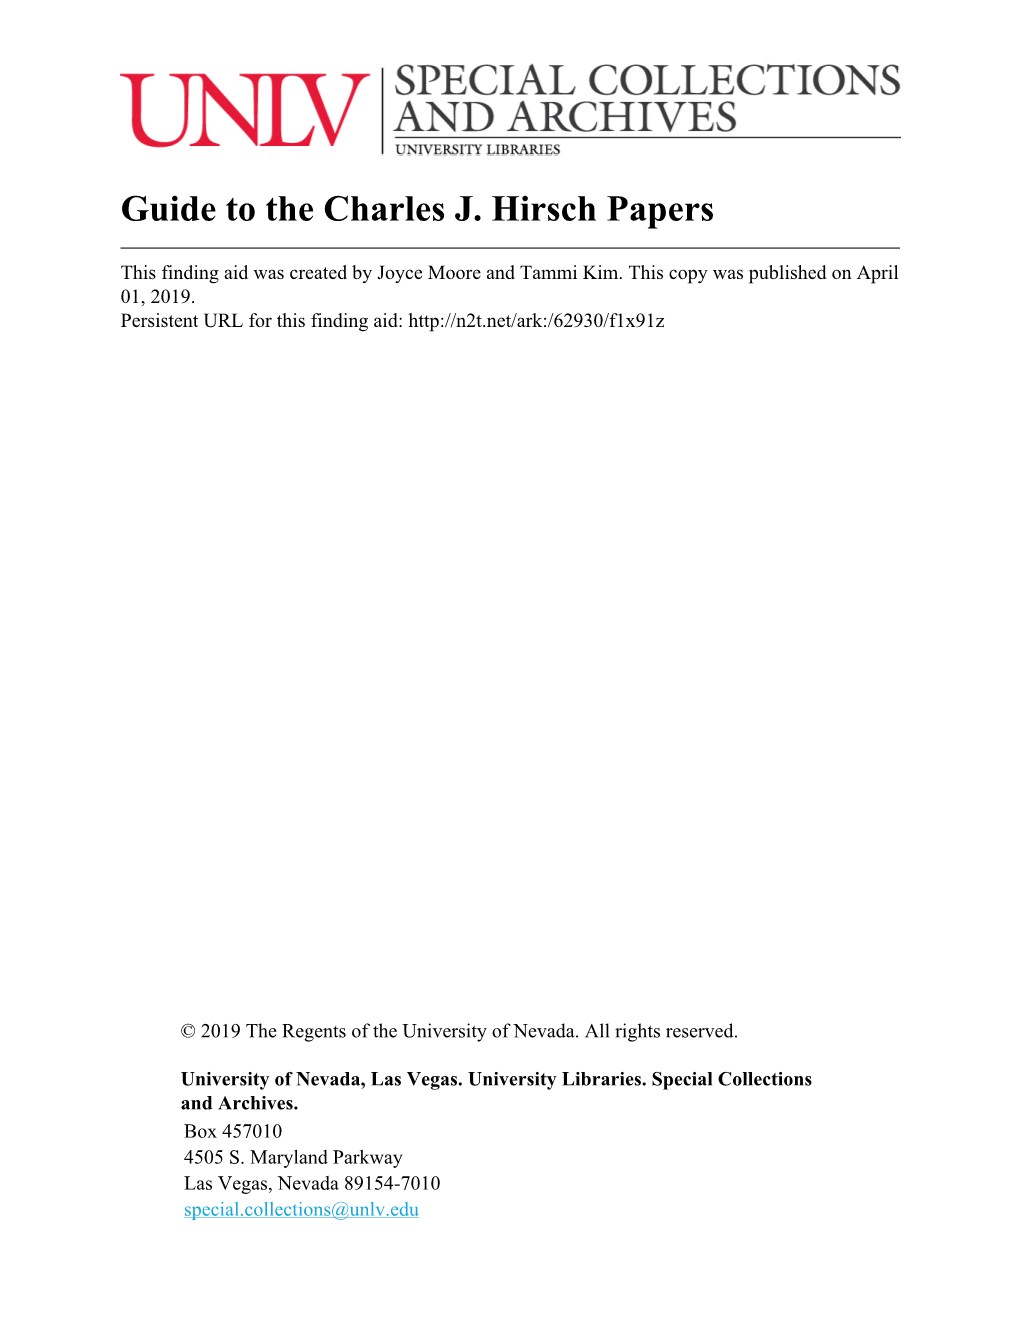 Guide to the Charles J. Hirsch Papers